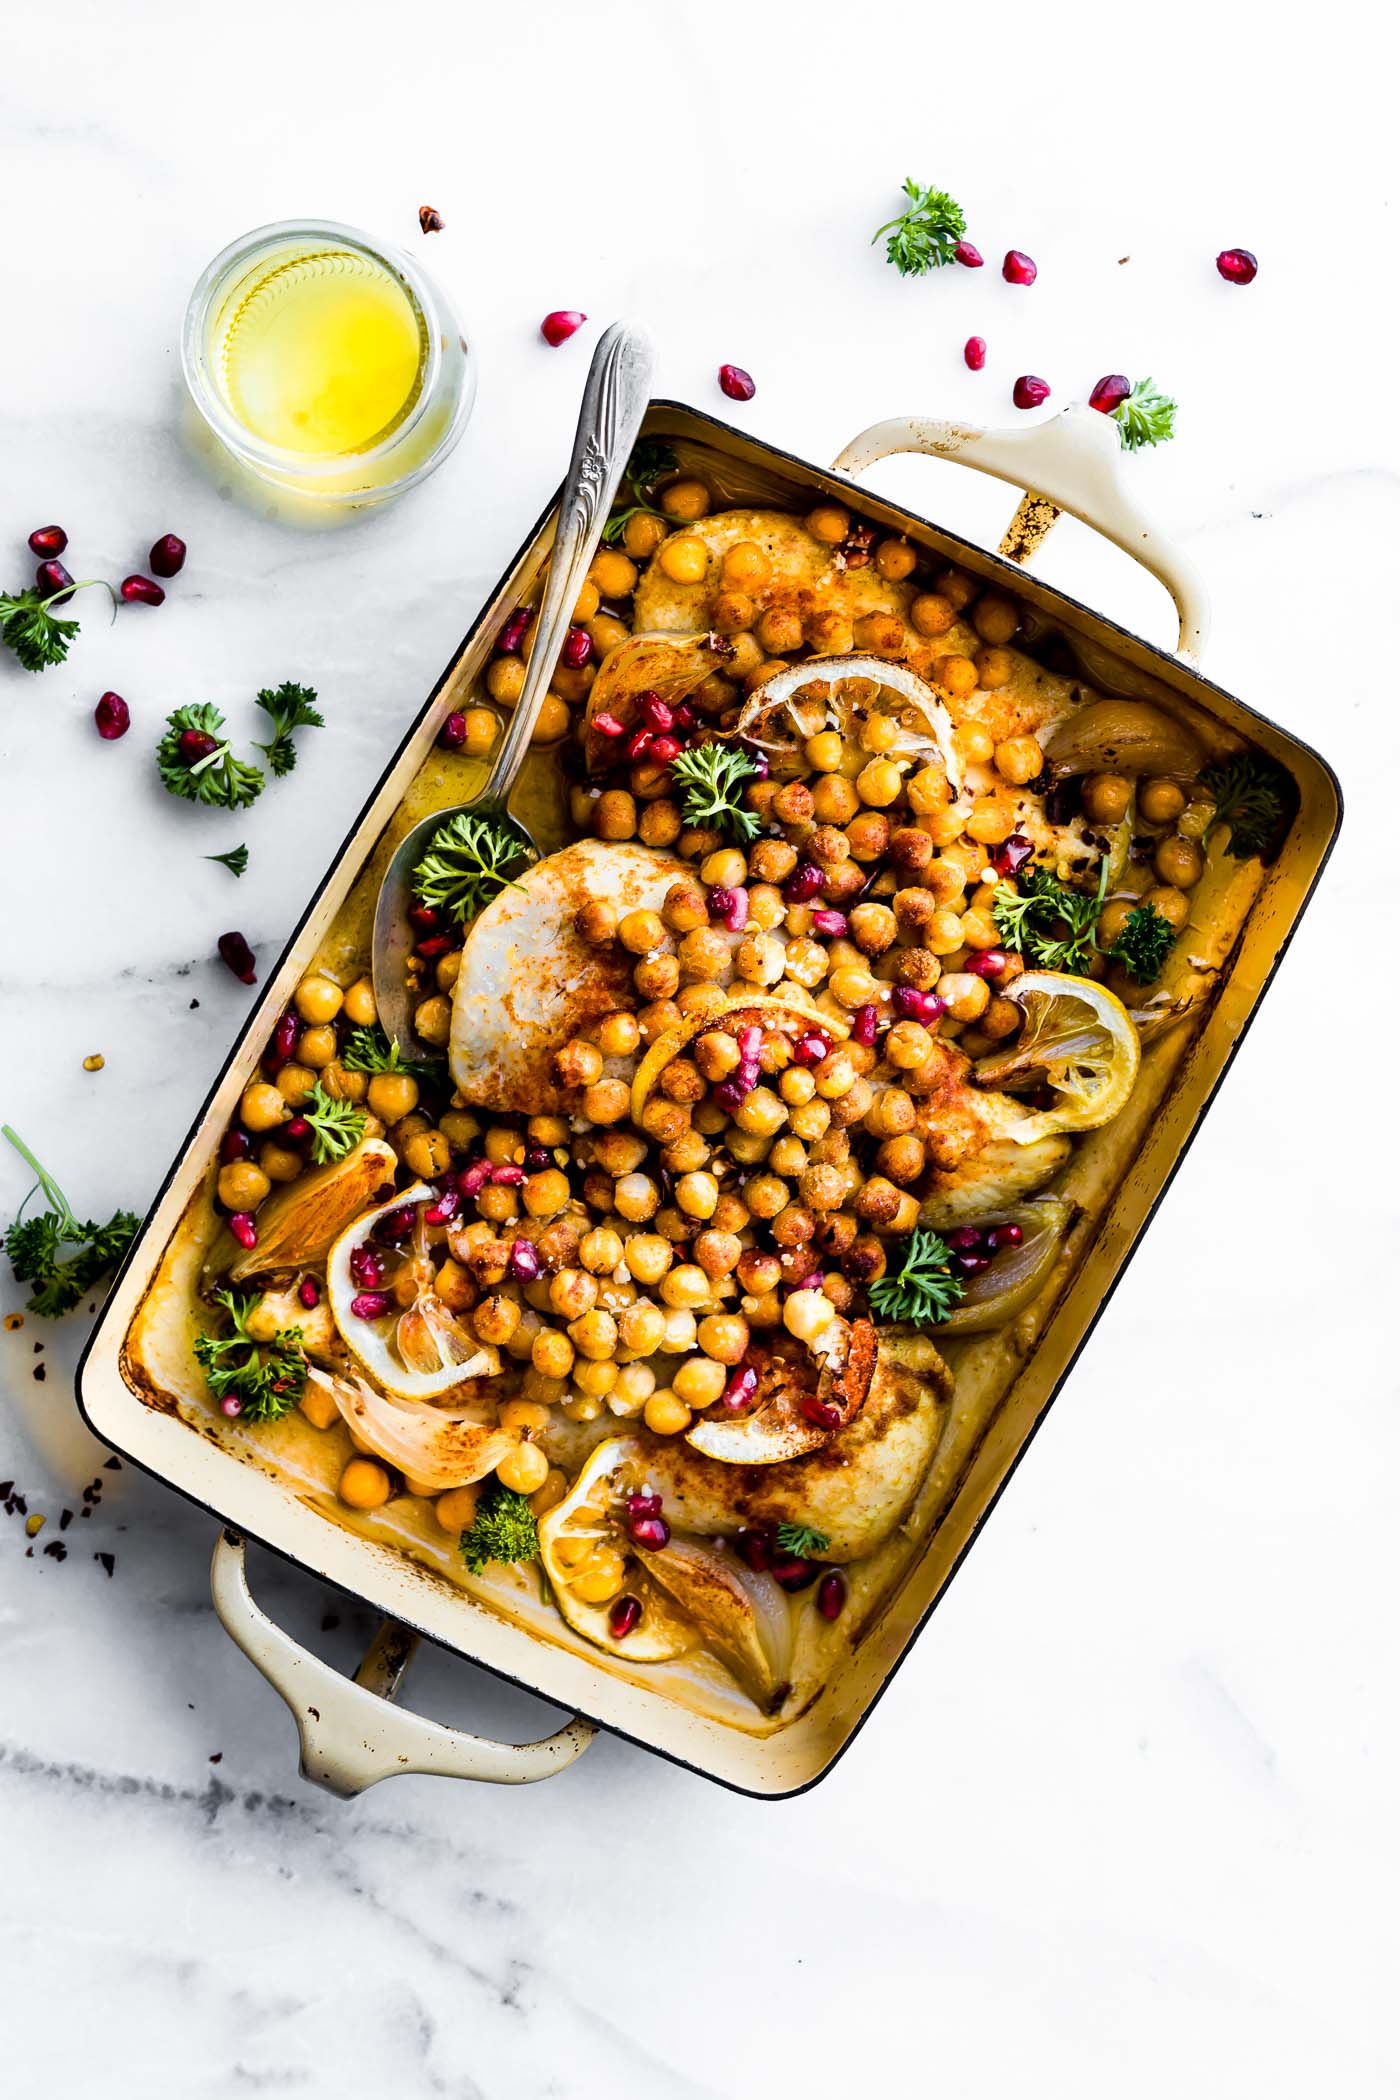 Cumin roasted chickpea chicken bowls are a gluten free weeknight dinner, packed with wholesome goodness and nutrition! This easy one pan meal combines tangy citrus and honey marinated chicken and roasted chickpeas into a delicious, easy baked chicken dinner recipe to love.